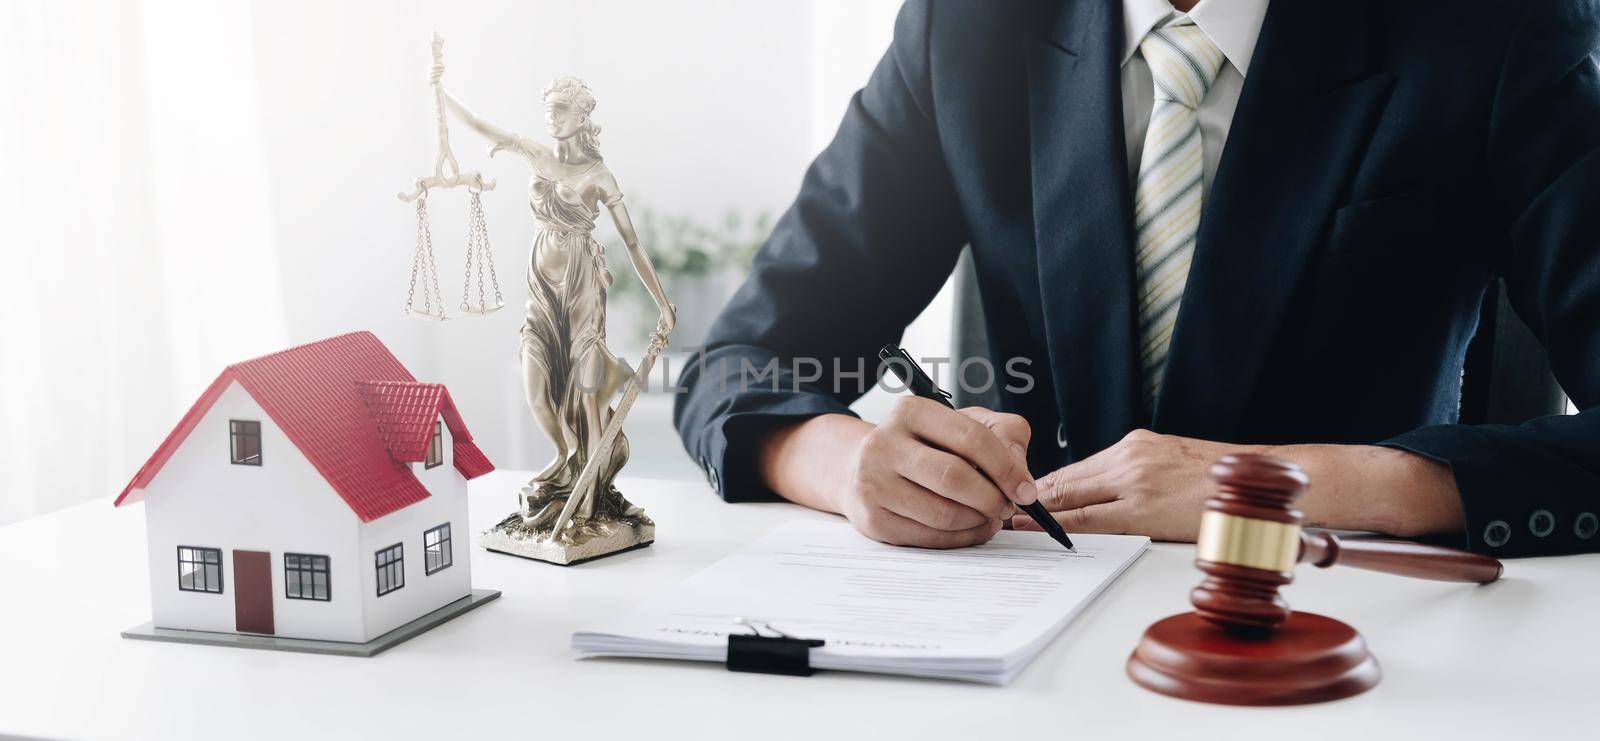 Judge gavel and house model on the table. Man signing in document. Real Estate Lawyer by wichayada